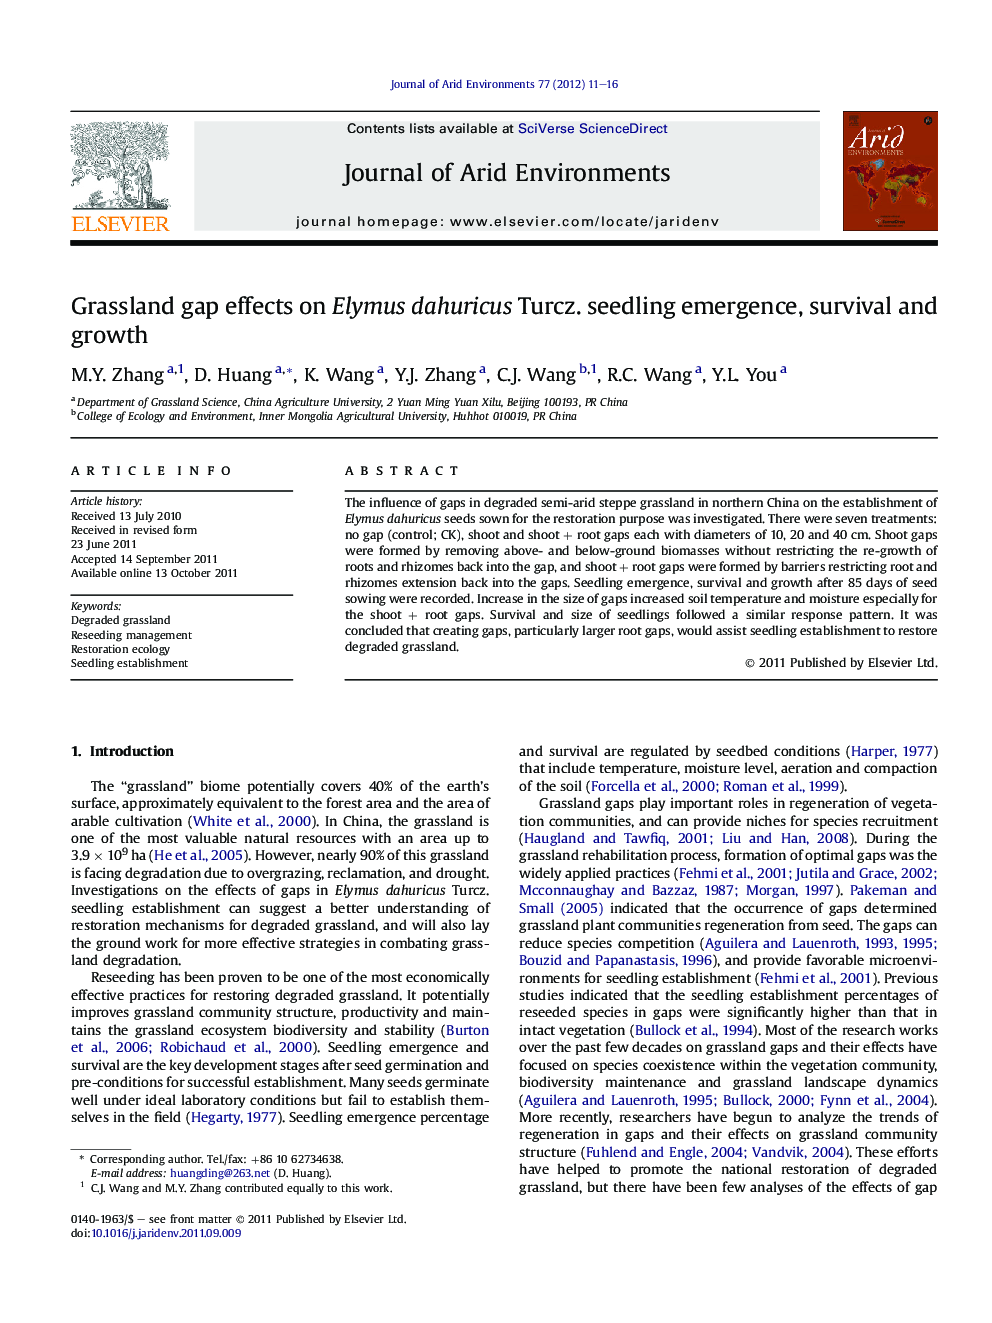 Grassland gap effects on Elymus dahuricus Turcz. seedling emergence, survival and growth